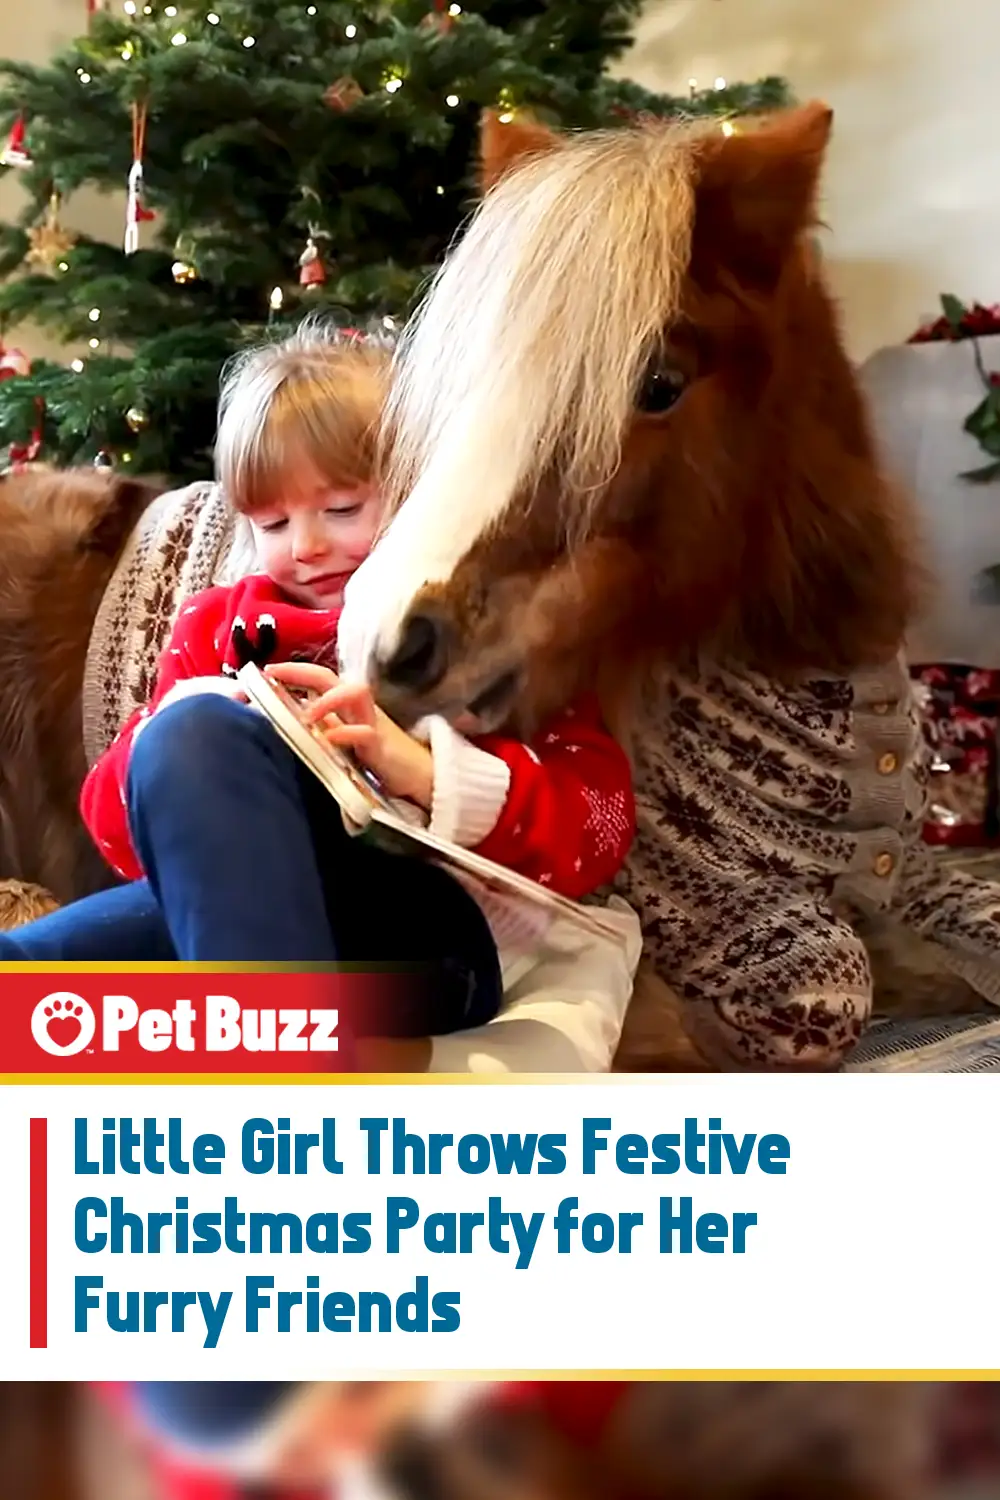 Little Girl Throws Festive Christmas Party for Her Furry Friends